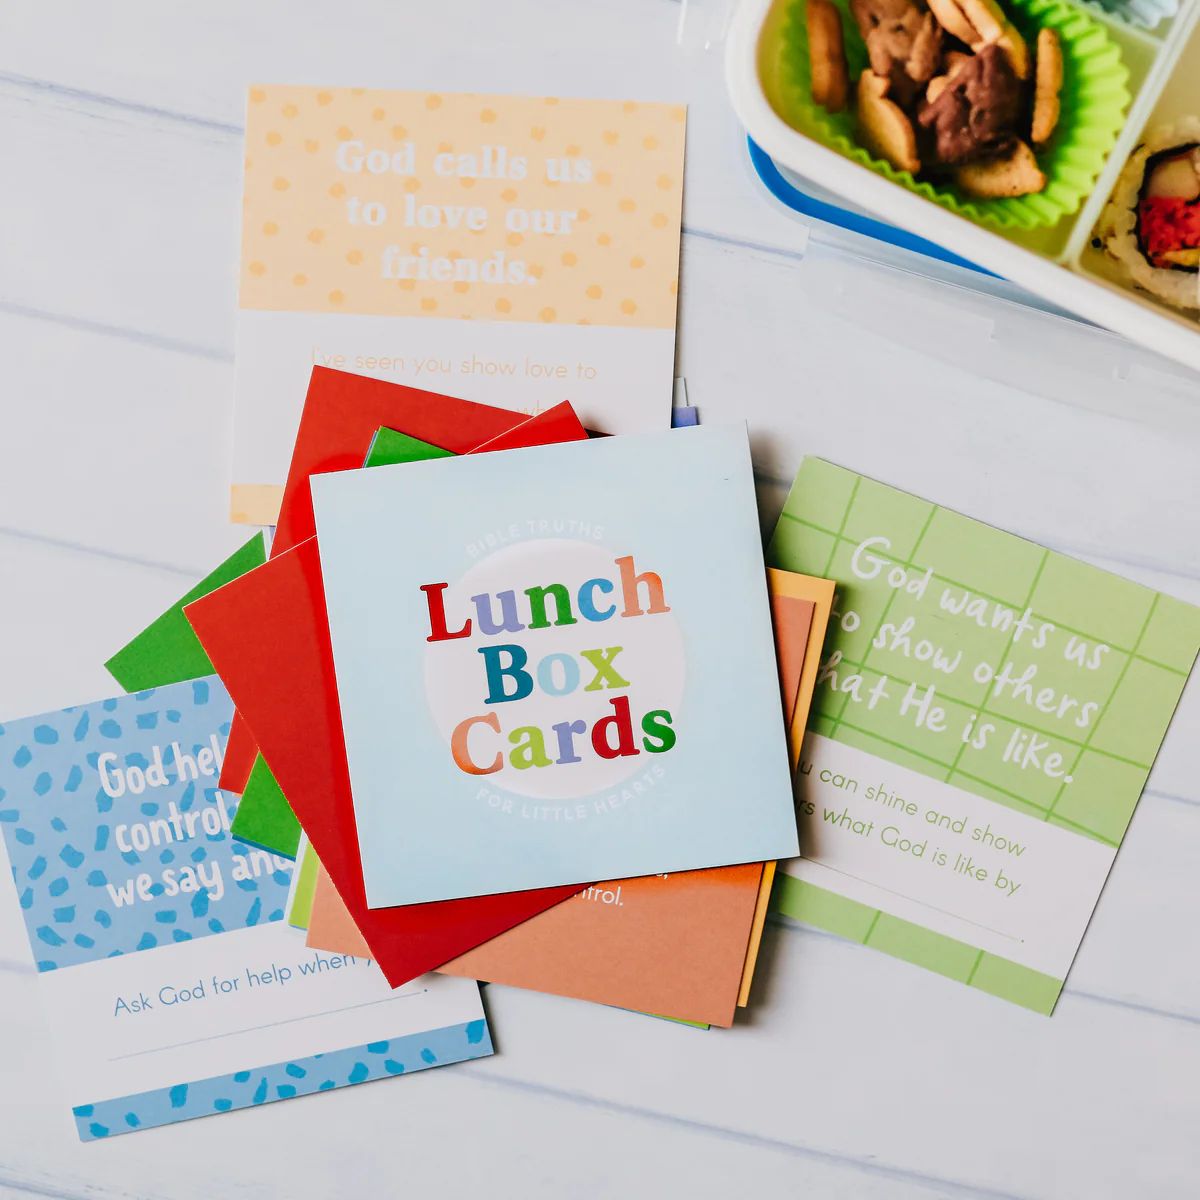 Lunch Box Cards | The Daily Grace Co.